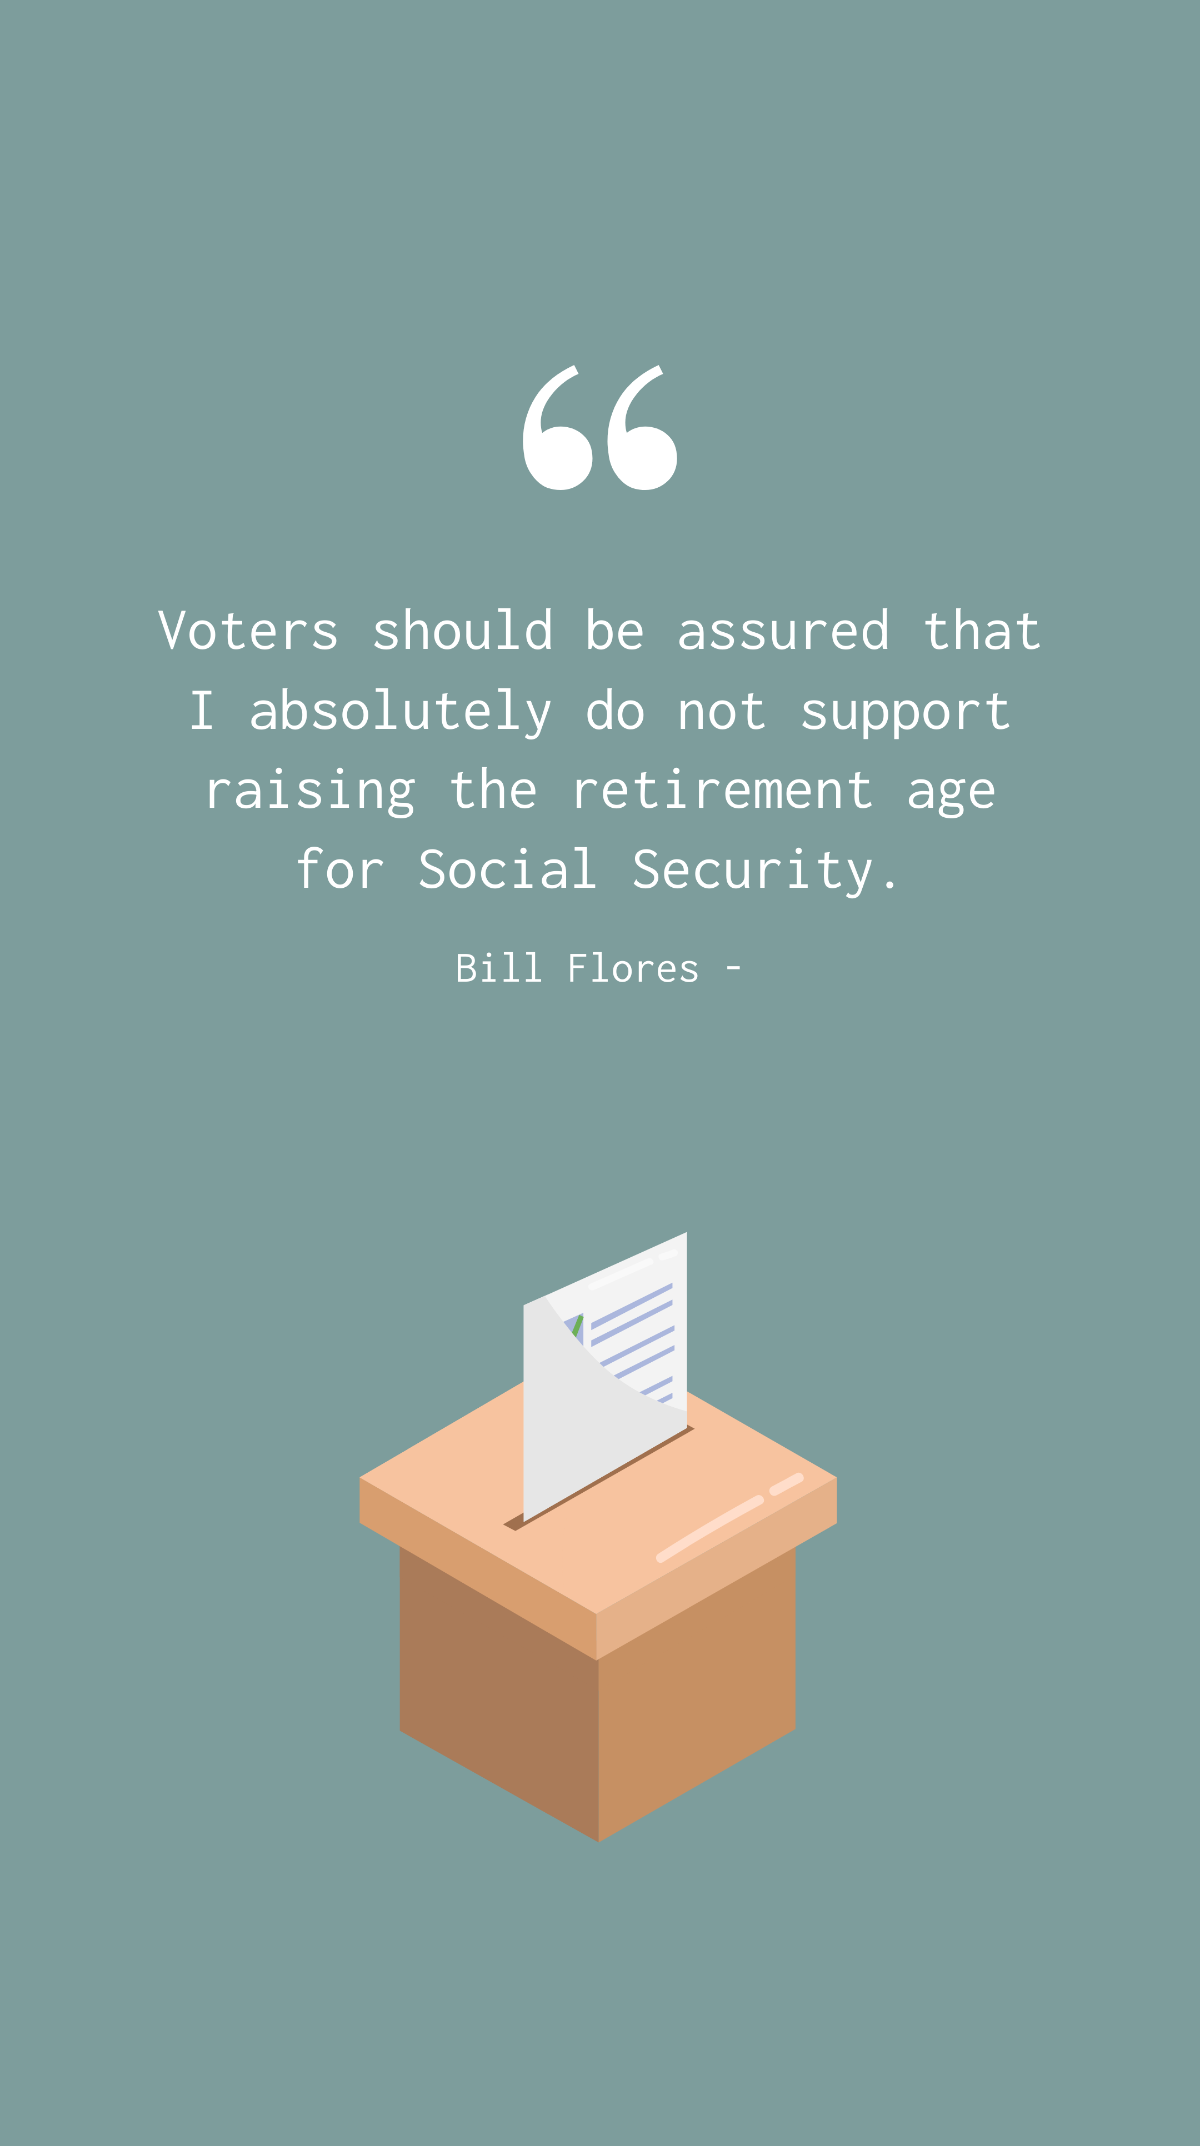 Bill Flores - Voters should be assured that I absolutely do not support raising the retirement age for Social Security. Template